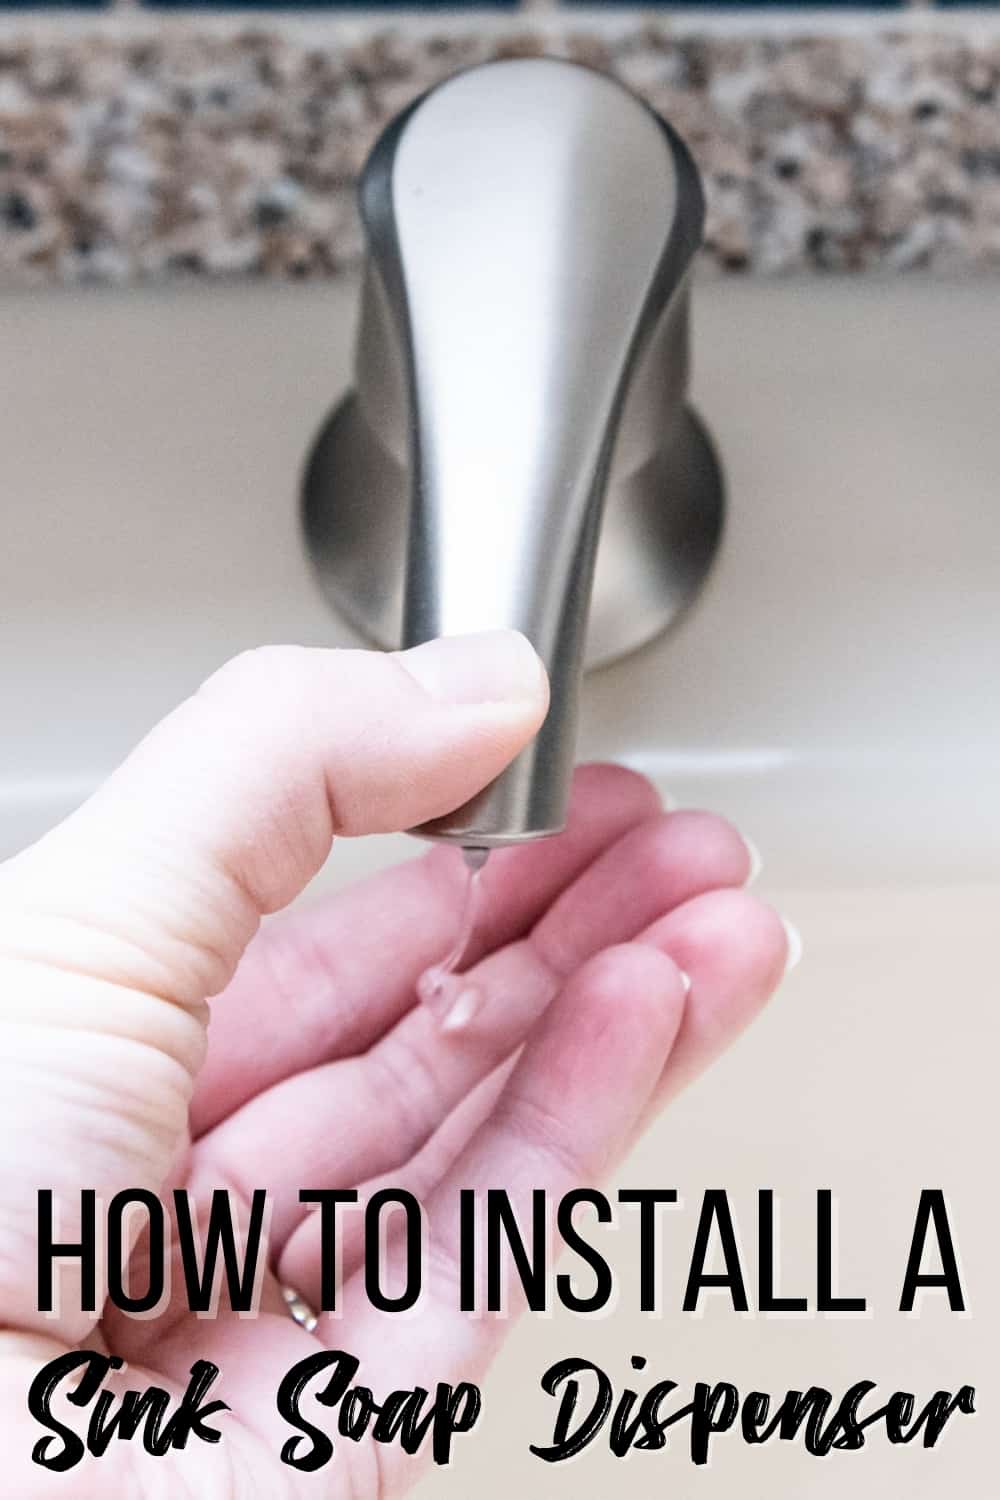 how to install a sink soap dispenser